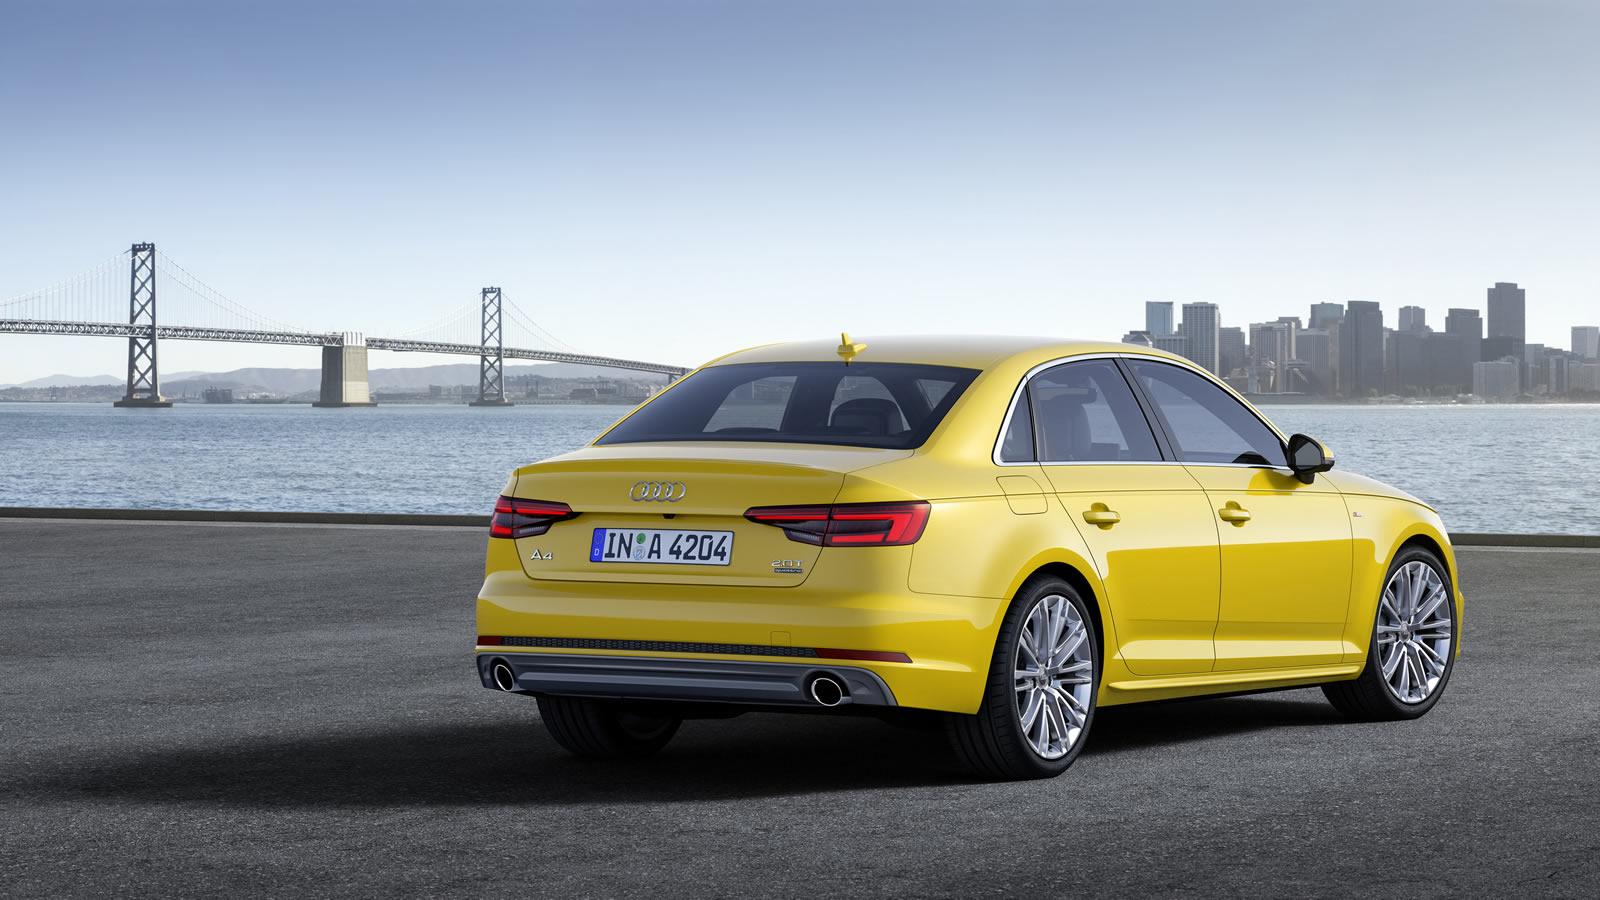 2016 Audi A4 Sedan Revealed with 120 Kg Weight Loss and